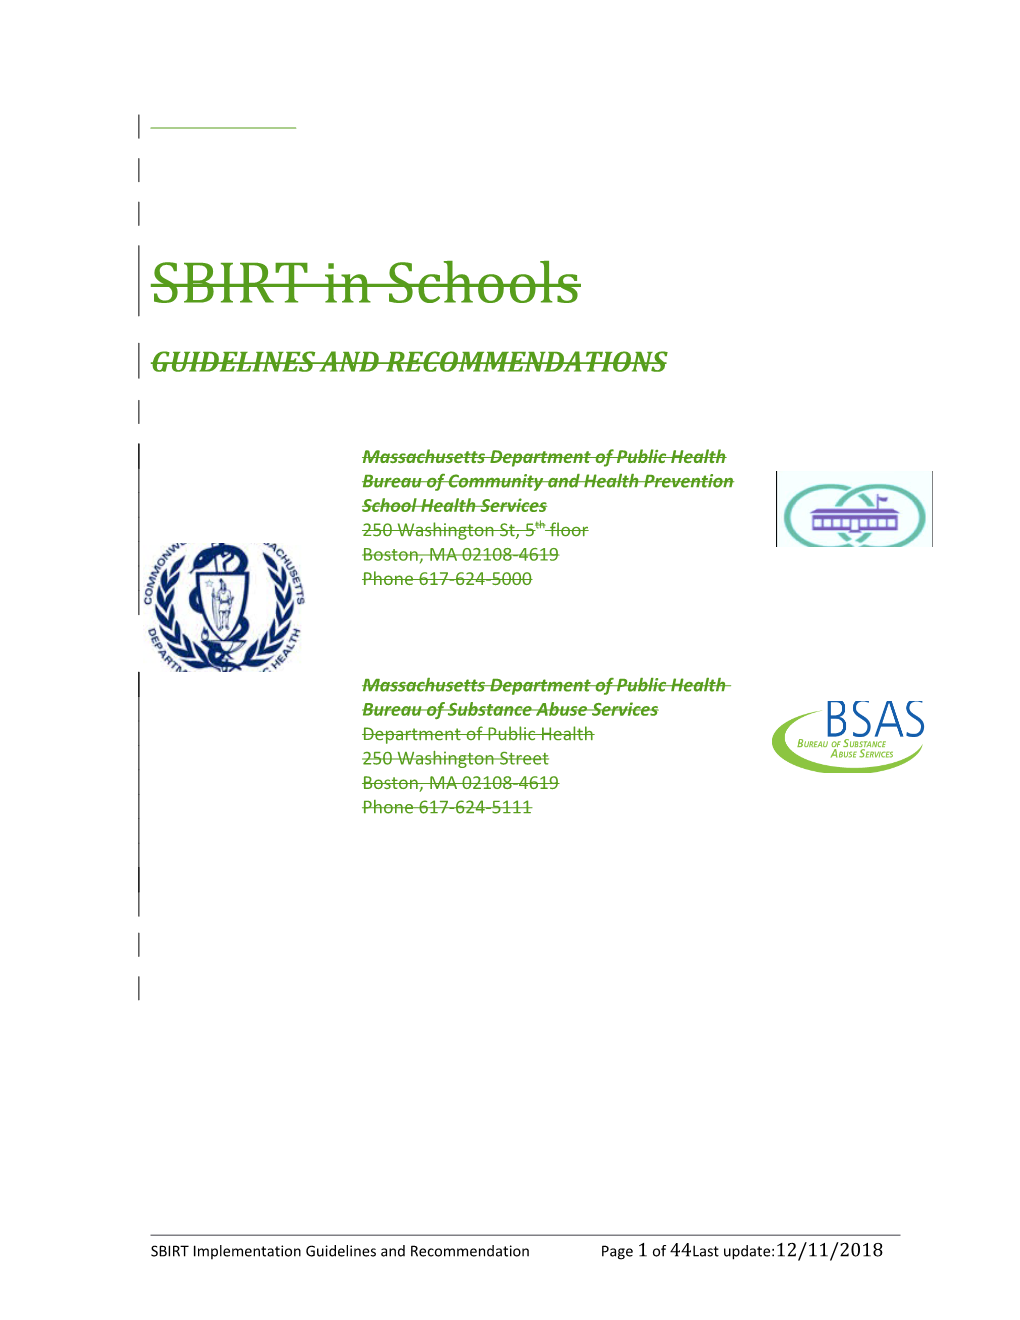 Protocol for School Nurses and Other School Staff to Identify Students at Risk For